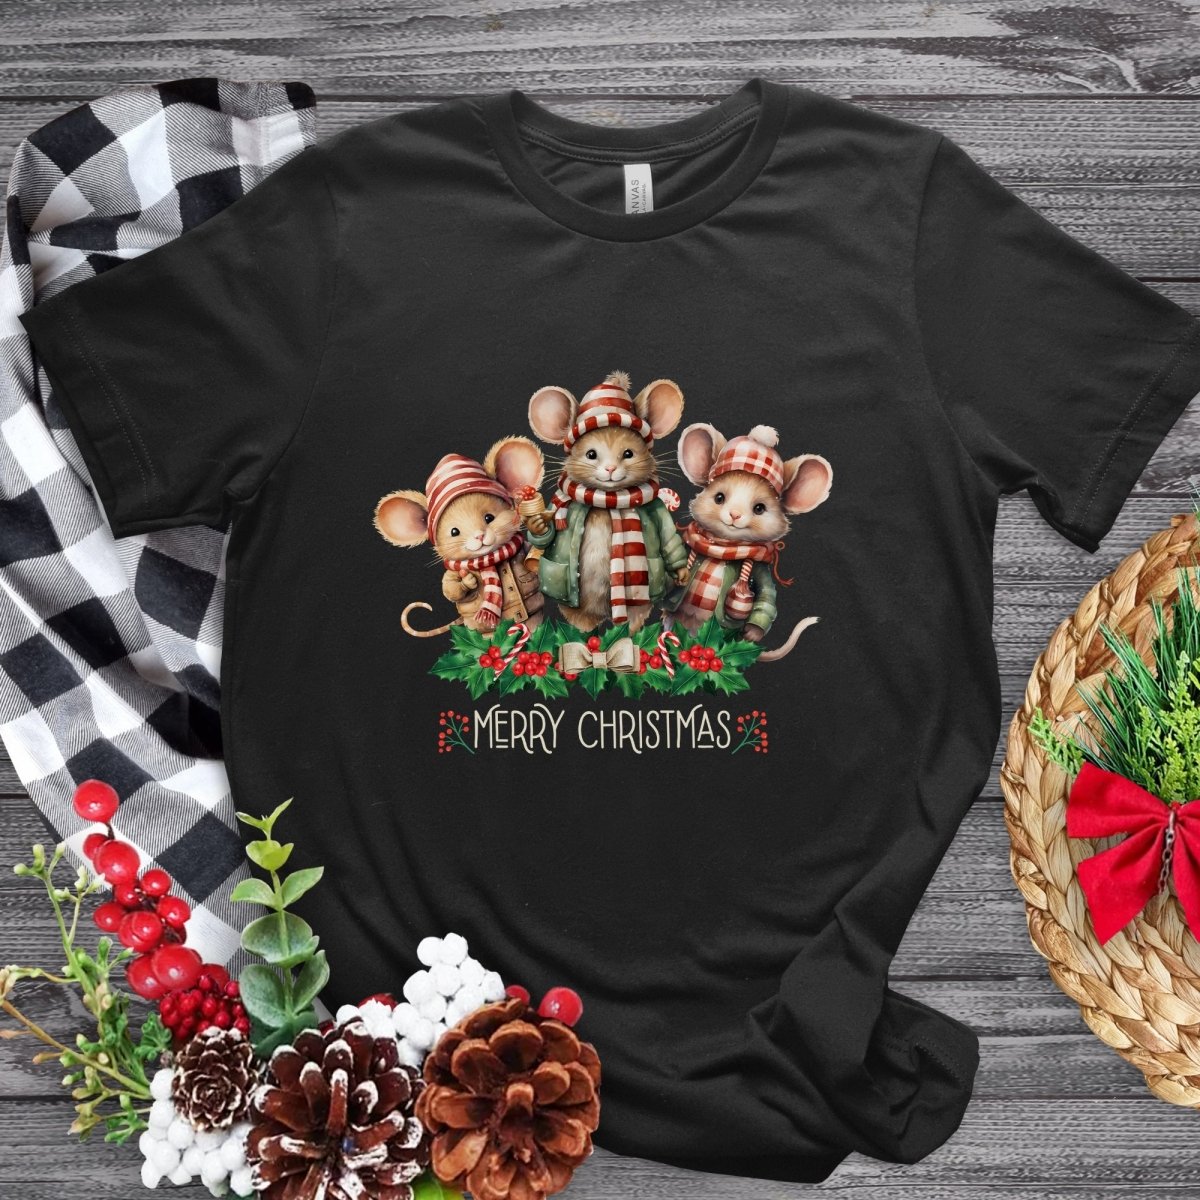 Christmas Mice T-Shirt - High Quality Festive Family Unisex T-Shirt, Family Reunion Tee, Holiday Shirt, Christmas Vacation Tee, Cute Mouse - Everything Pixel